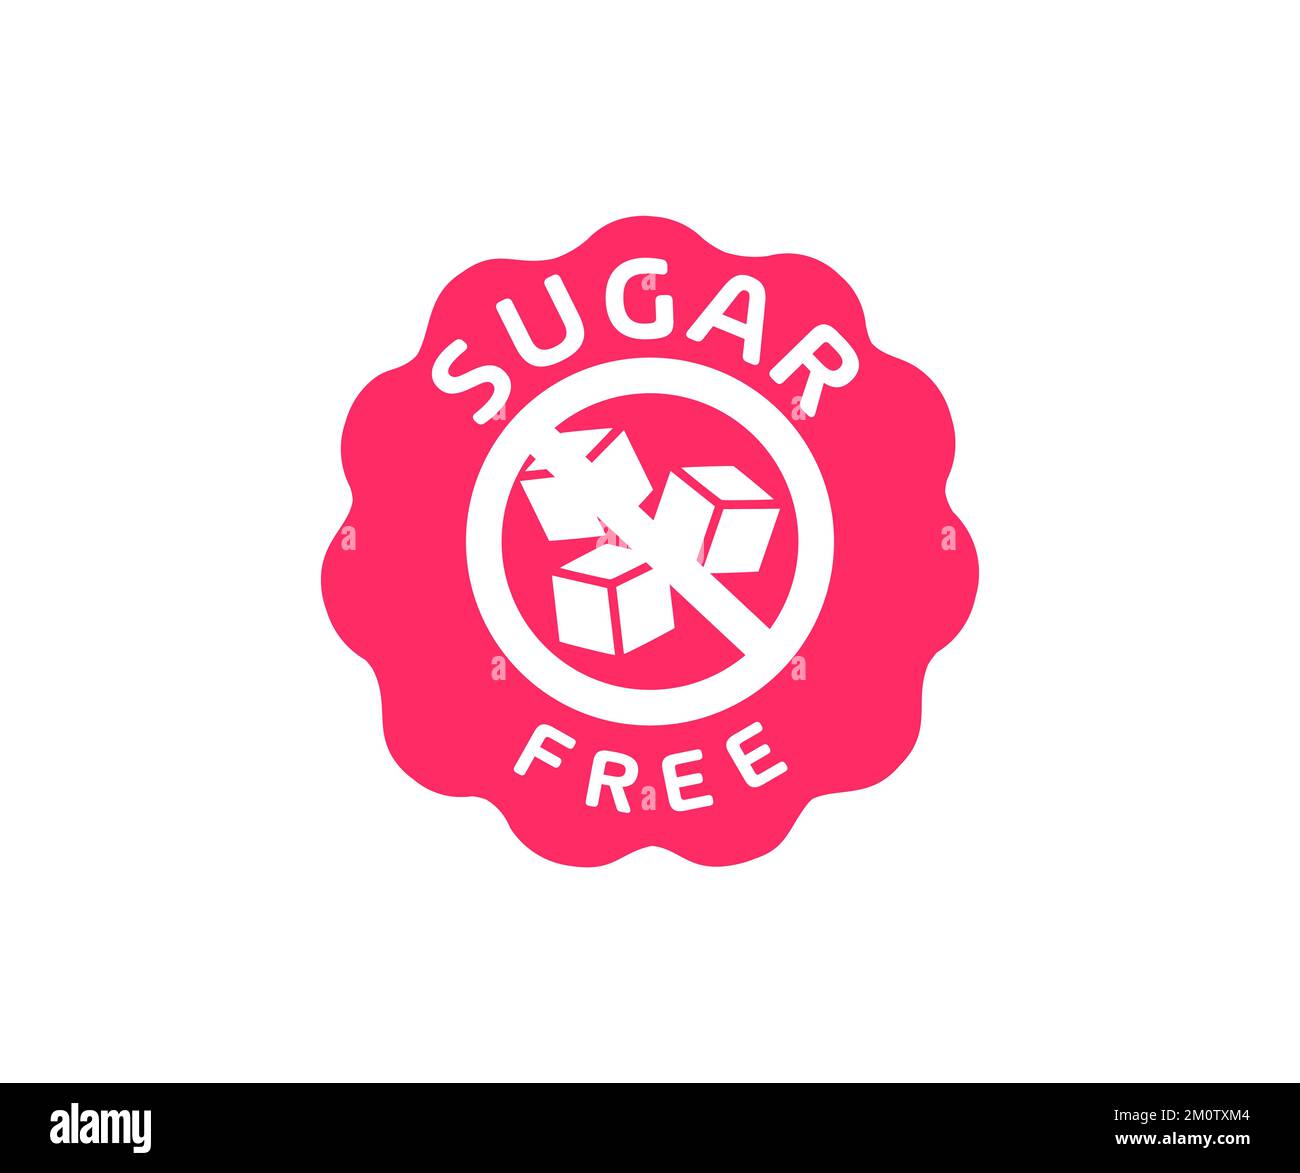 Sugar free stamp, label or sticker, sign, logo design. No sugar added product. Diabetes concept. Unhealthy nutrition, obesity, diabetes, dental care. Stock Vector